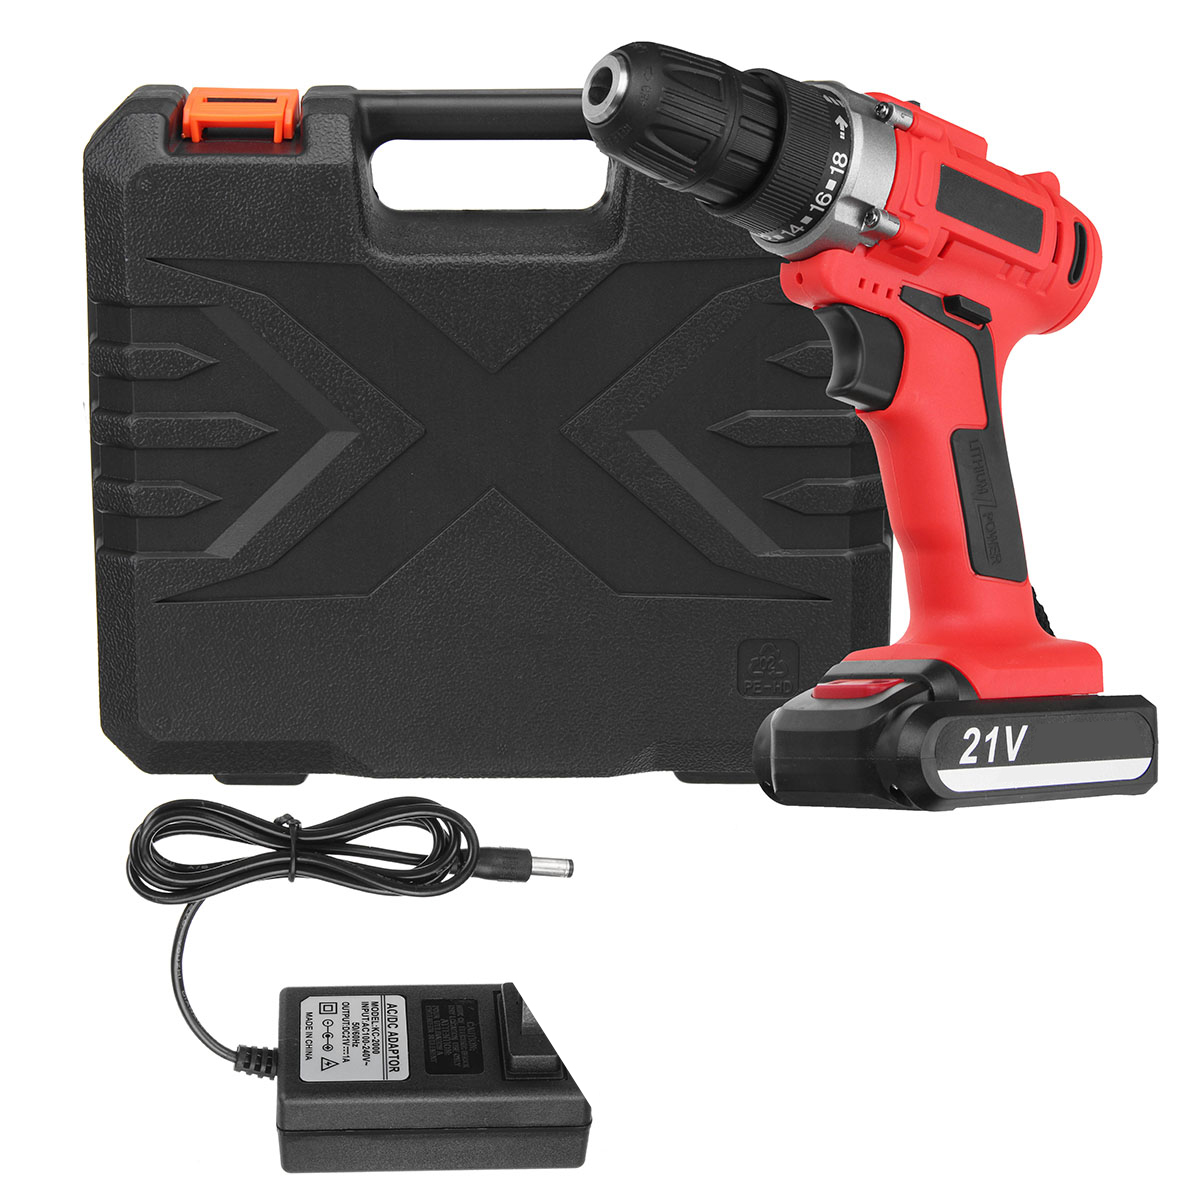 300W-21V-LED-Cordless-Electric-Drill-Screwdriver-1500mAh-Rechargeable-Li-Ion-Battery-Repair-Tools-1421882-9